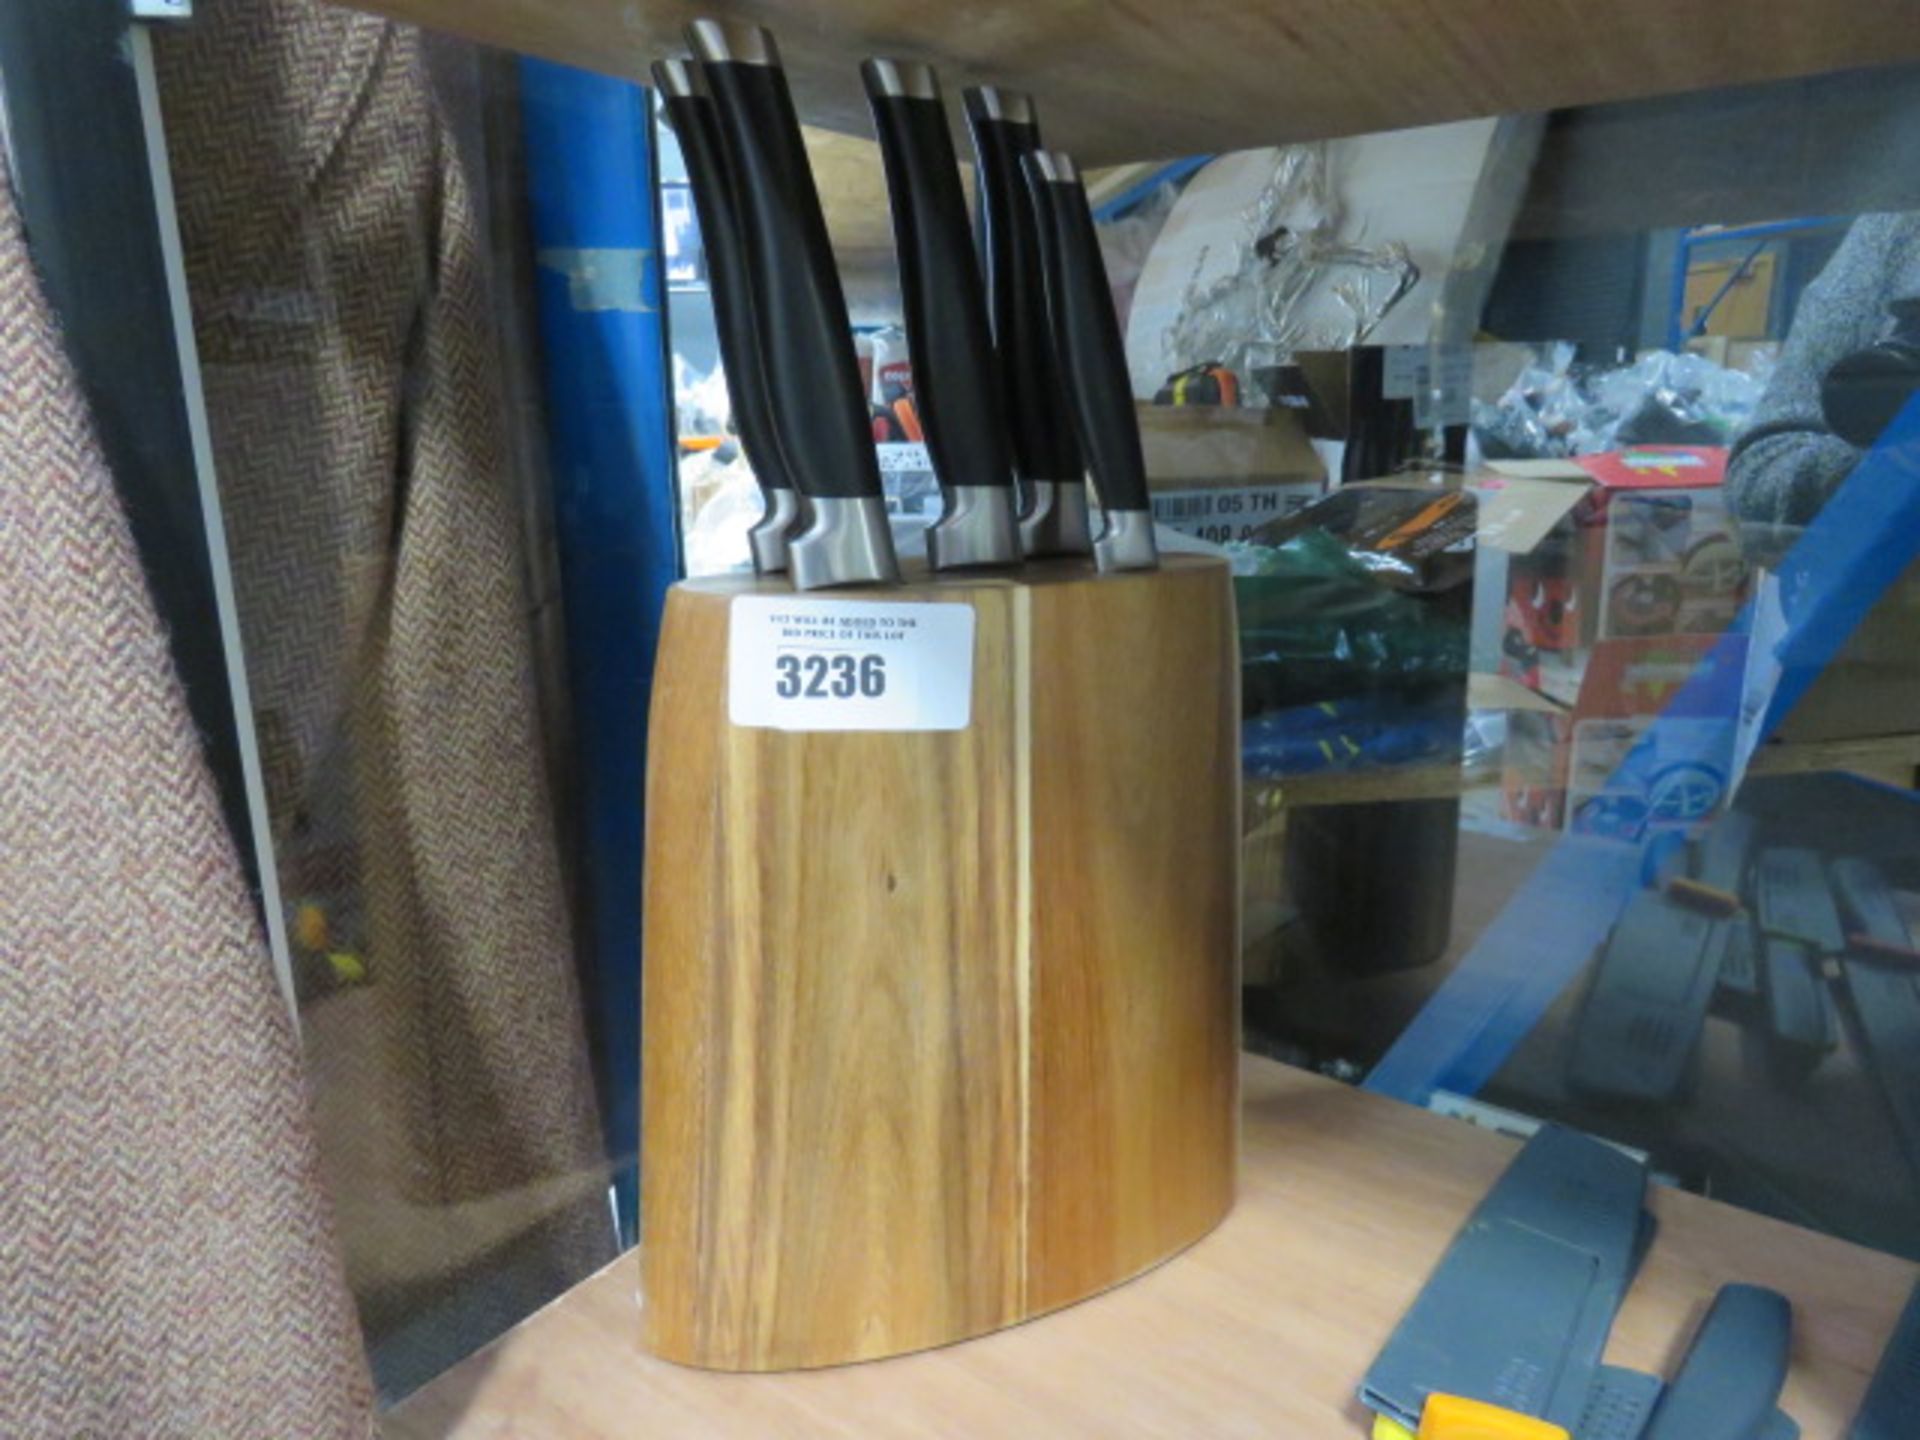 A wooden knife block and knife set